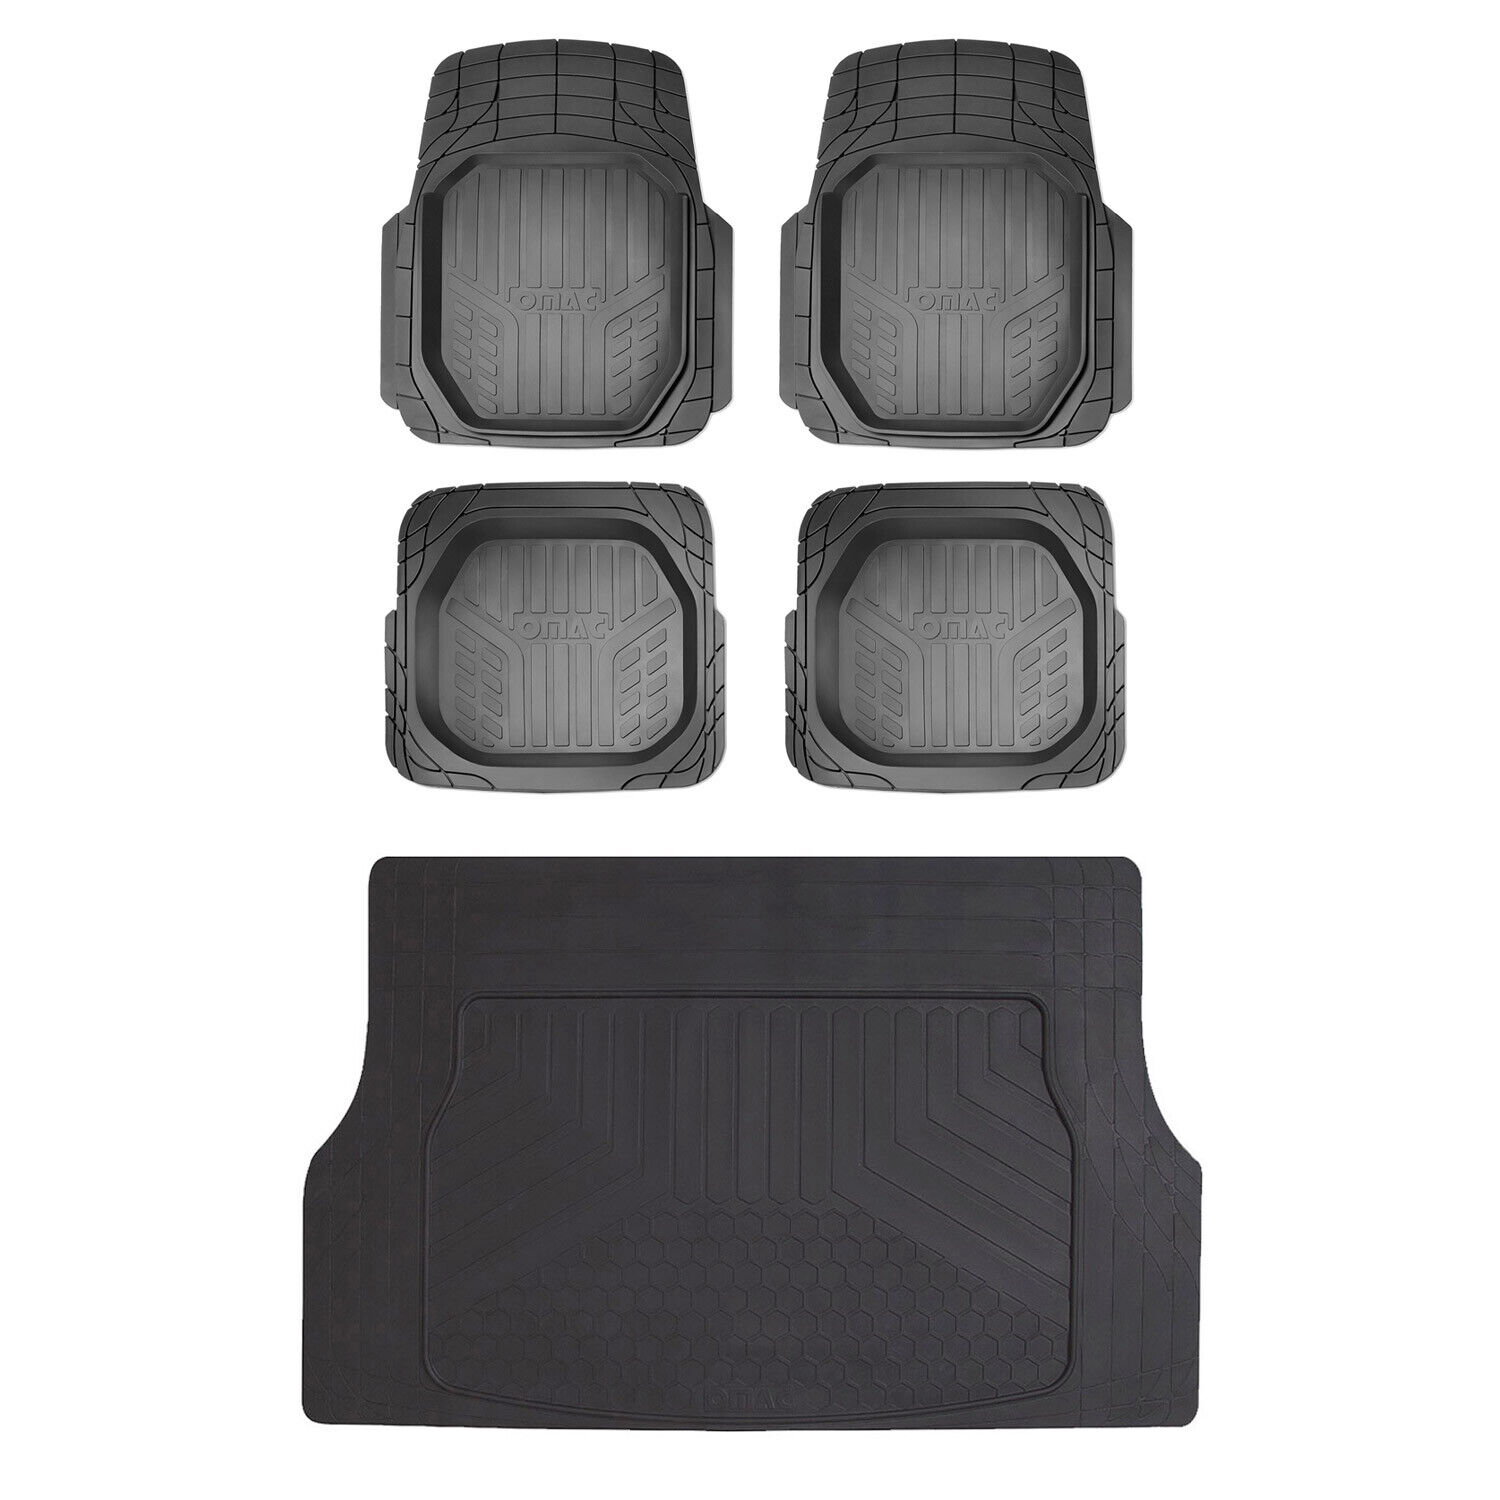 Trimmable Floor Mats & Cargo Liner Waterproof for Toyota Rubber Black 5 Pcs